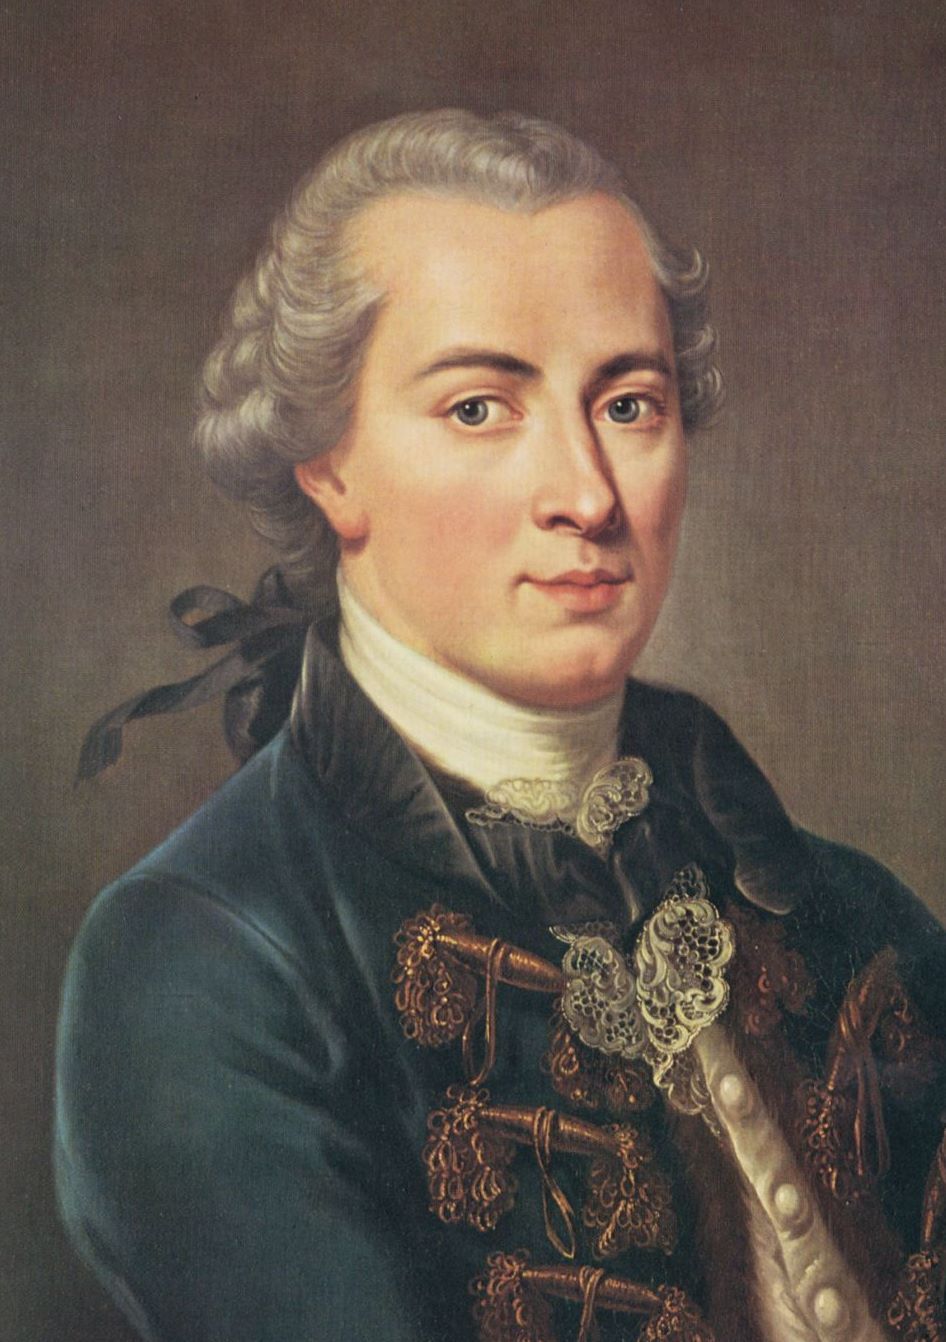 Immanuel Kant Biography, Immanuel Kant's Famous Quotes Quotes 2019